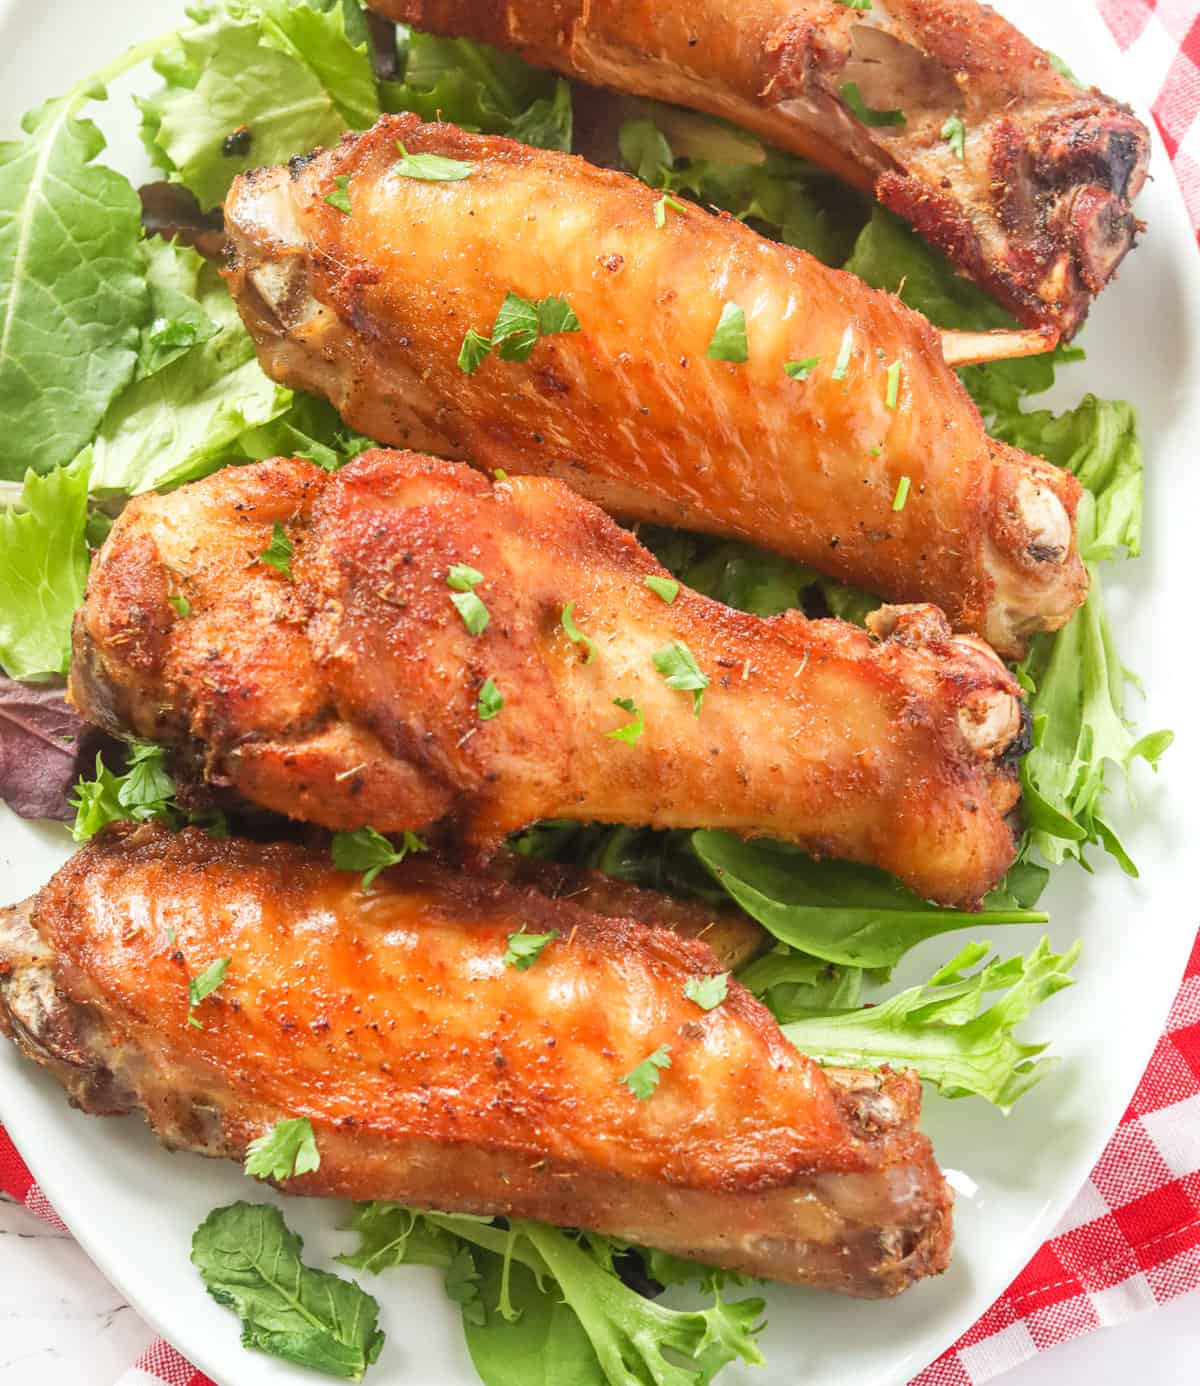 Fried Turkey Wings - Immaculate Bites